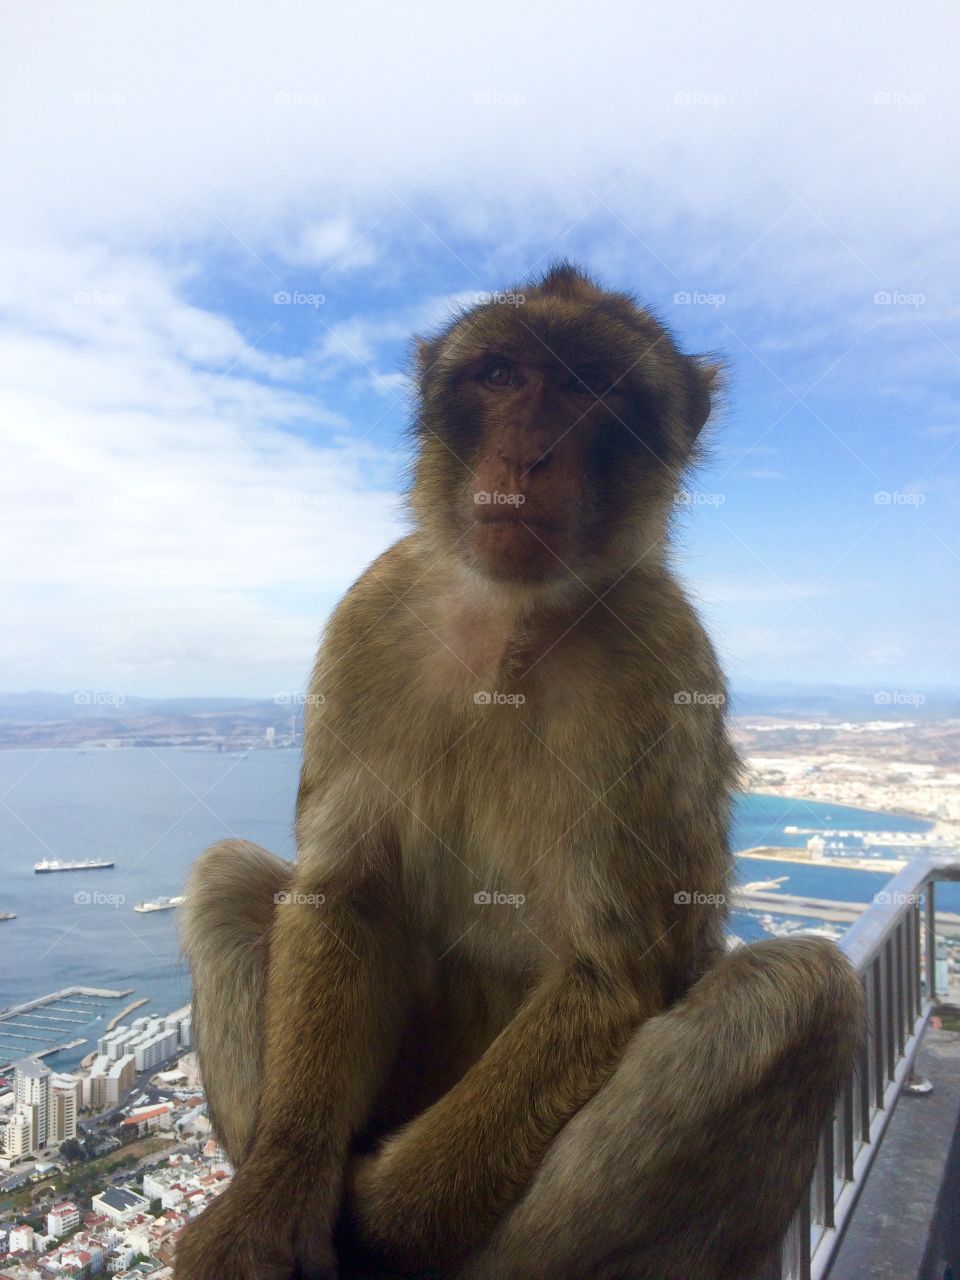 Monkey at Gibraltar . At the rock I meet this one